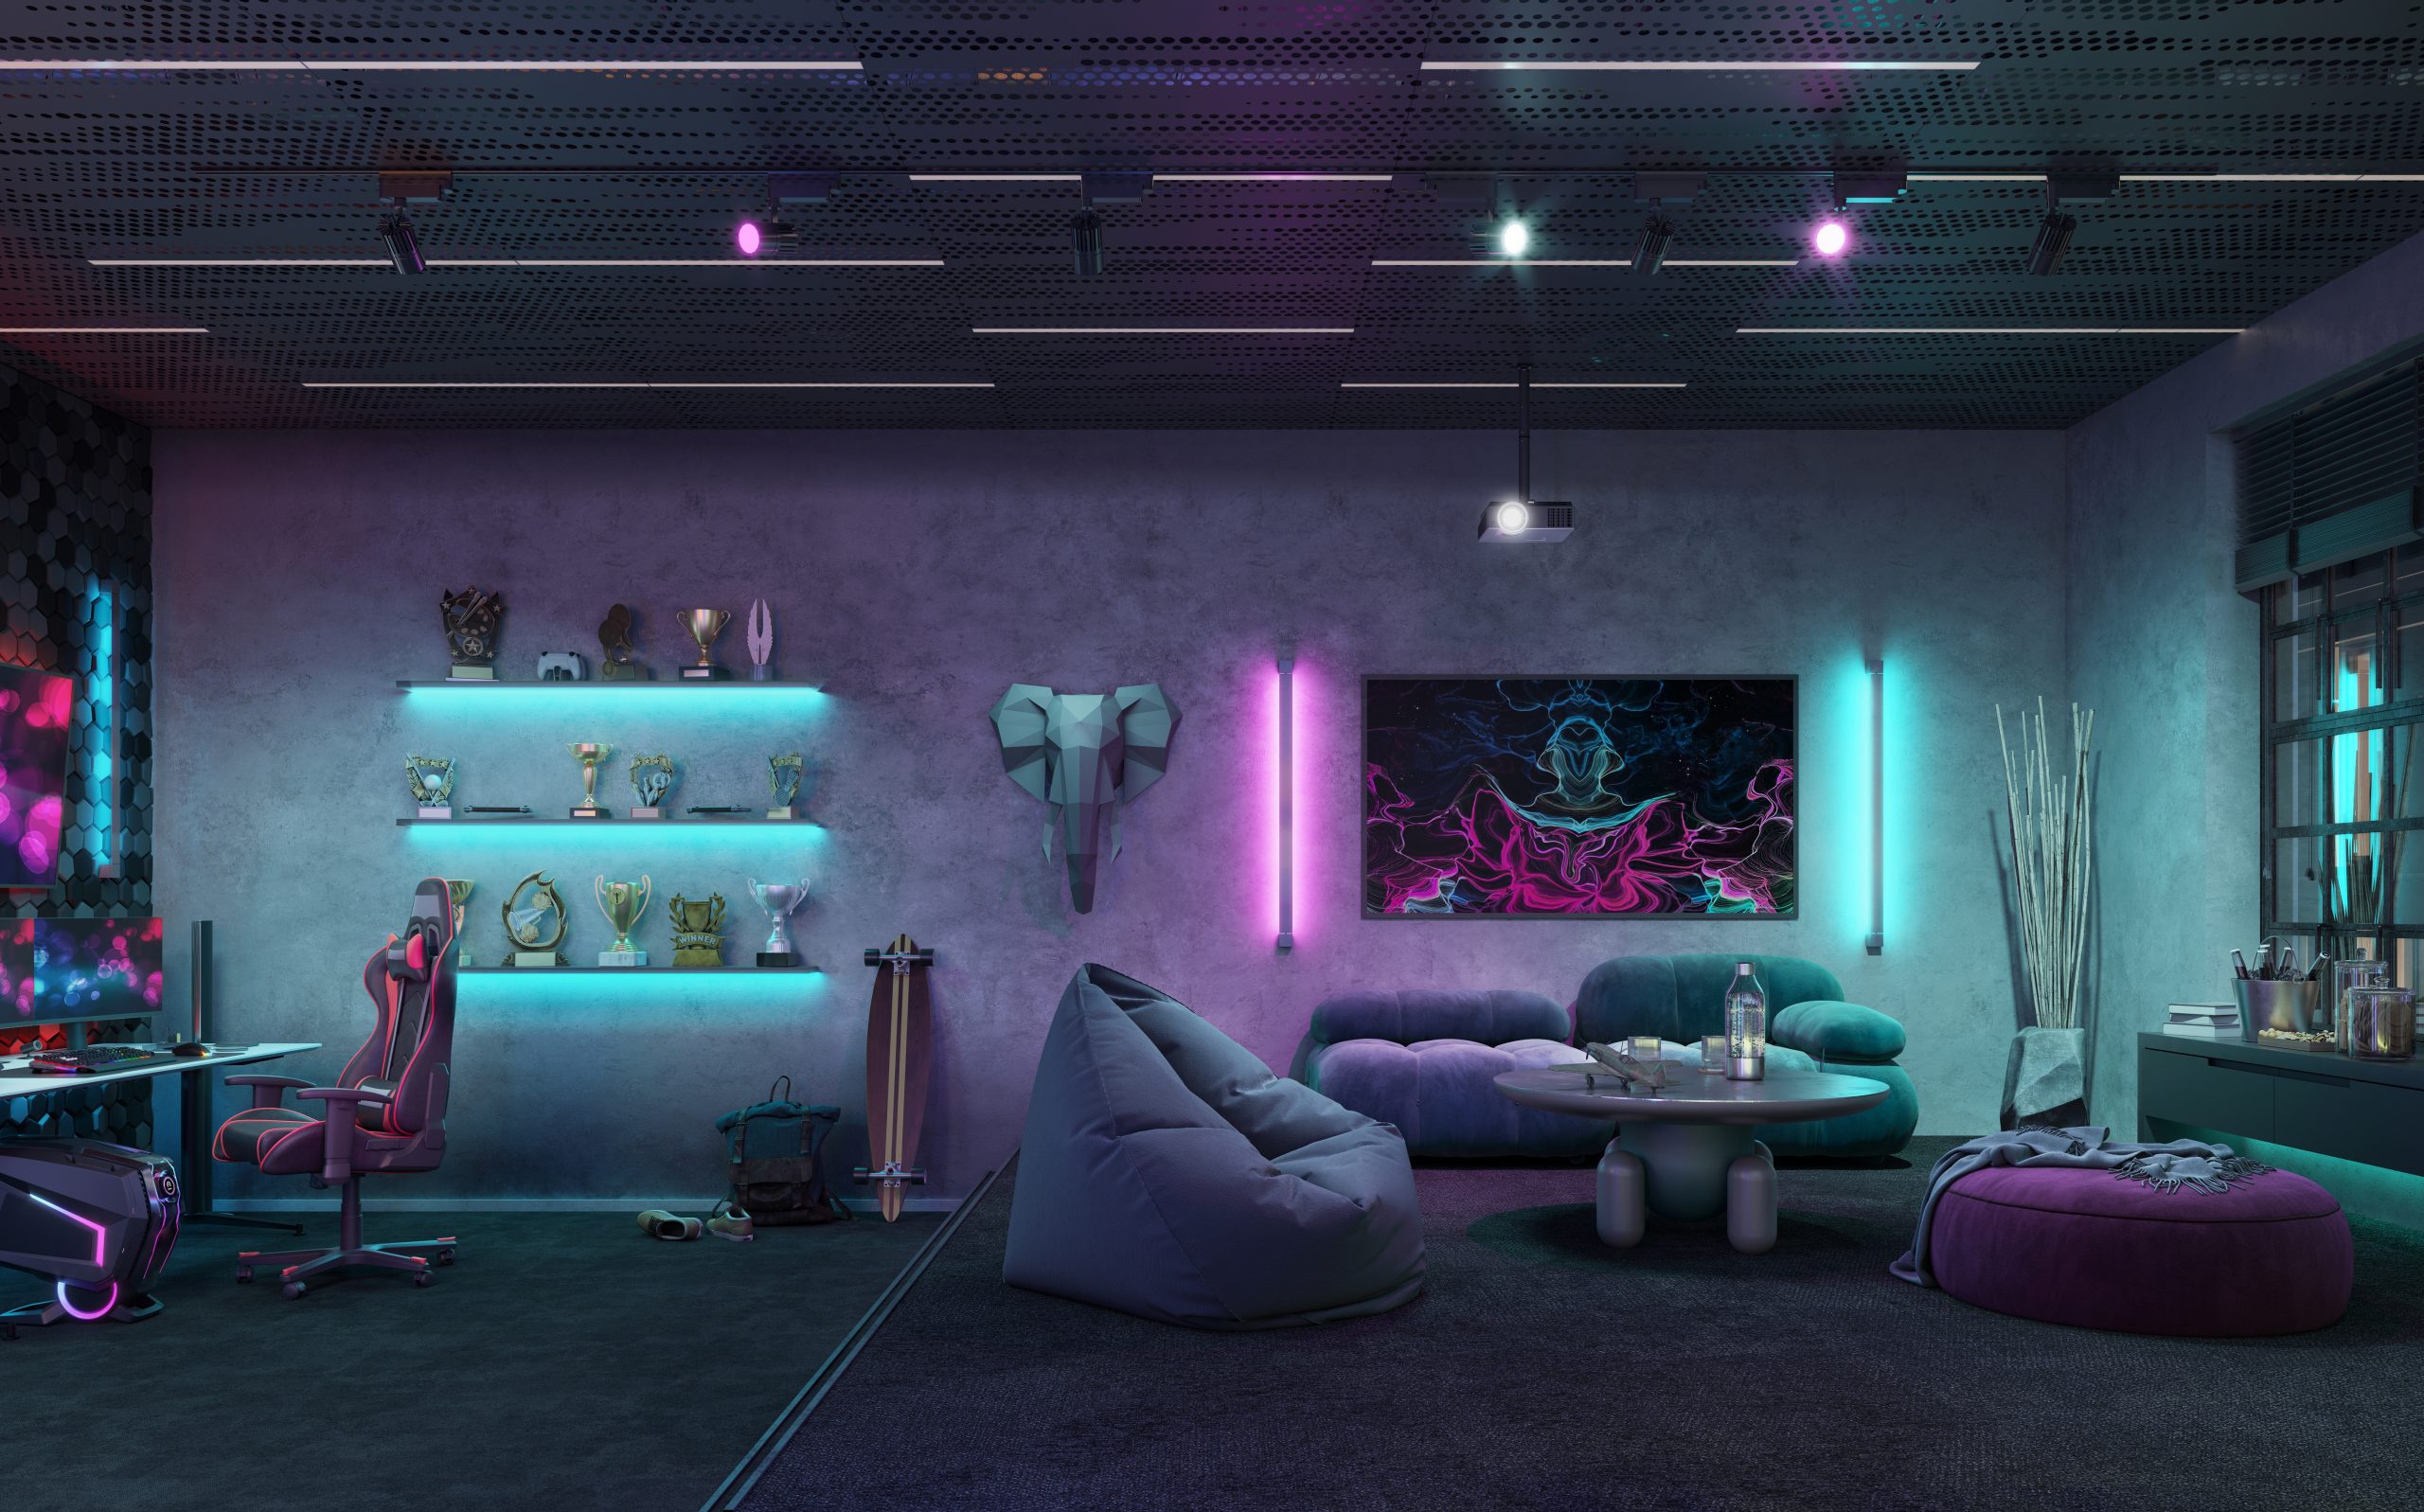 Video gamer room interior in 3d. Computer generated image of a game room interior with multicolored neon lightning, comfortable couch, artistic painting on the wall, projector on the ceiling and video gaming computer on desk.